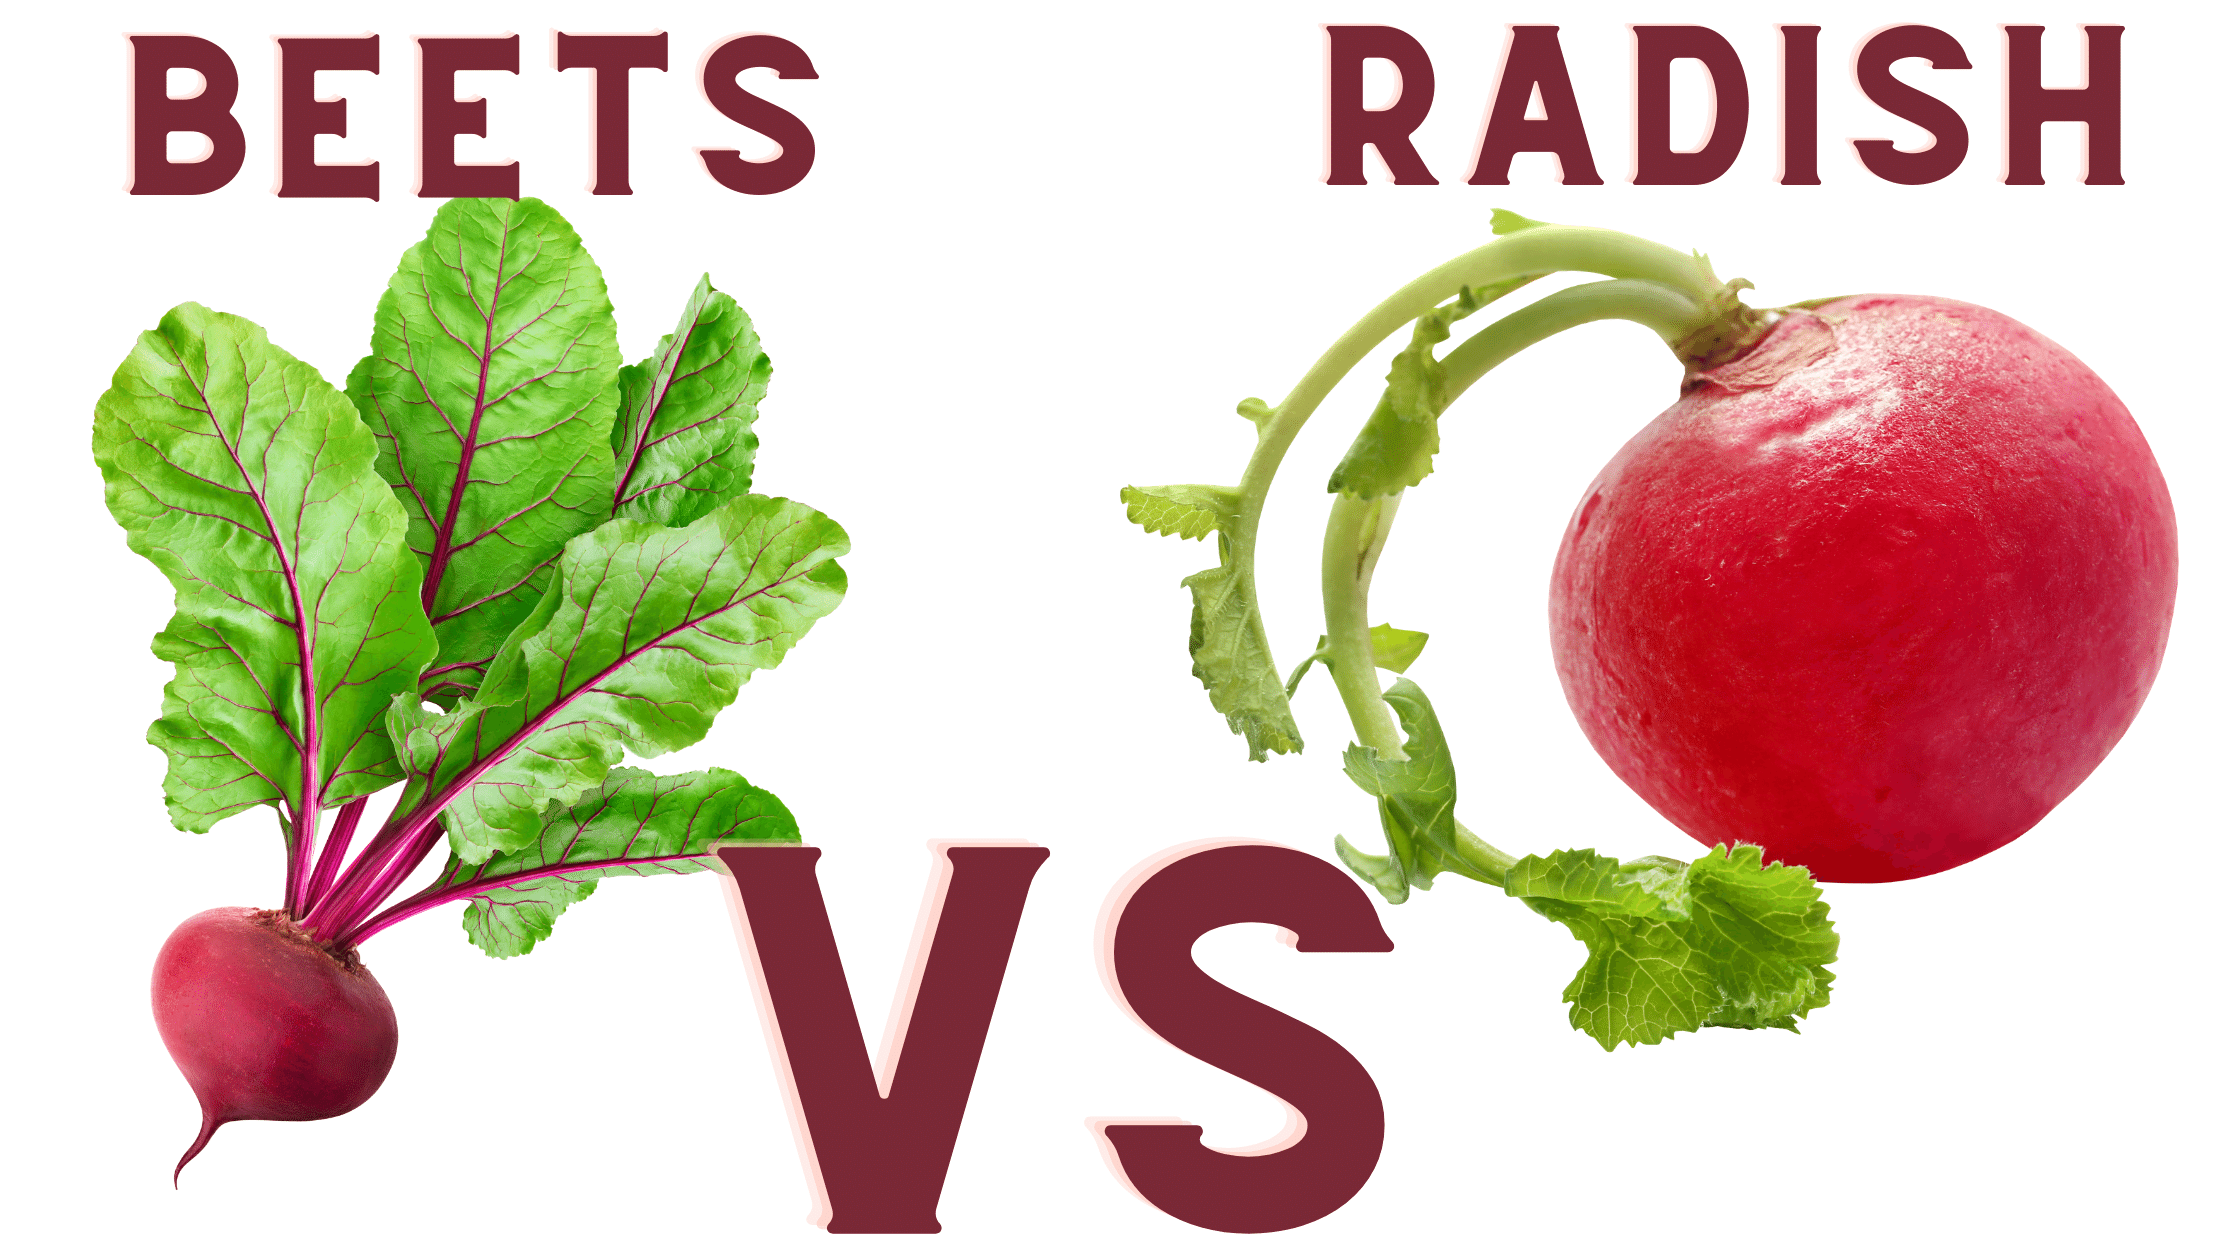 Image of Radishes and beets